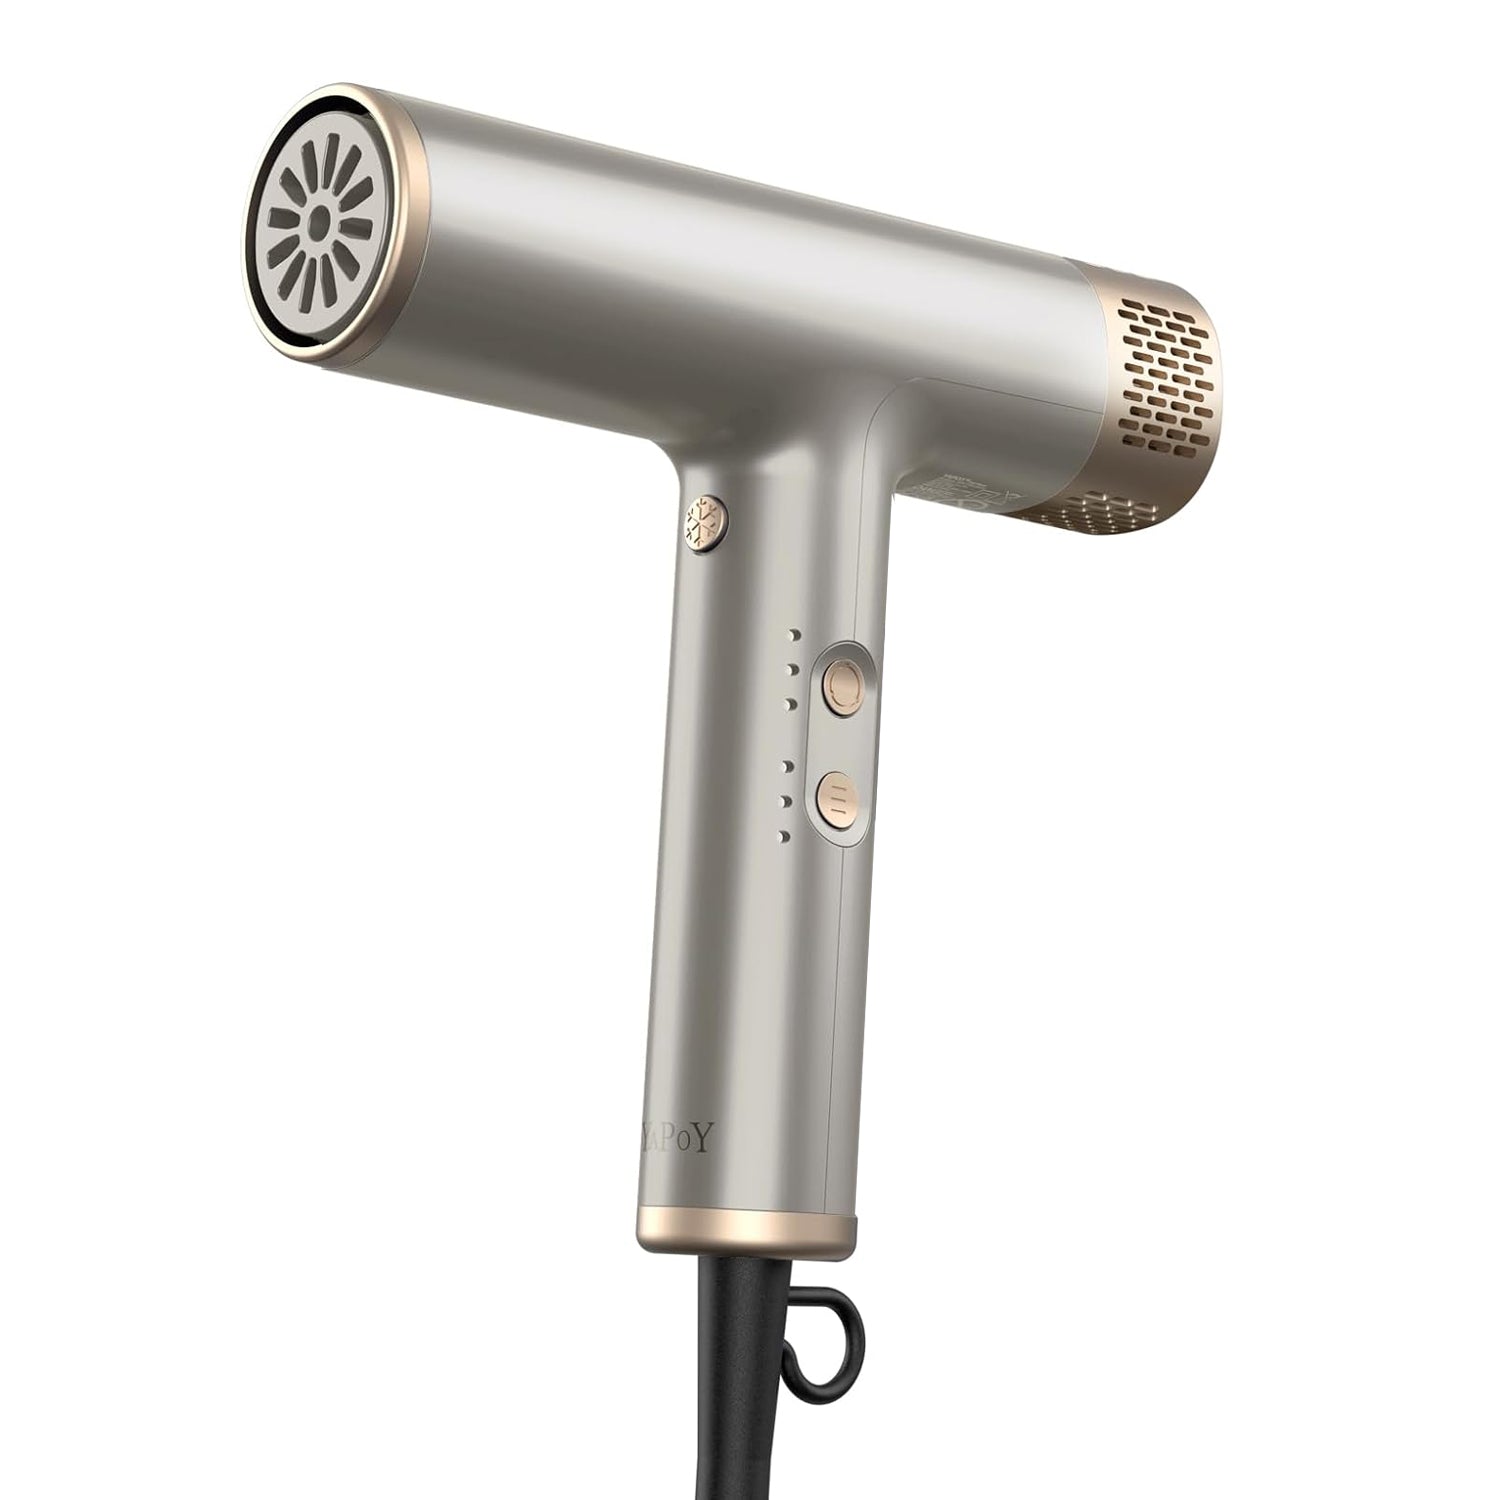 YAPOY High Speed Hair Dryer for a salon-quality experience at home5